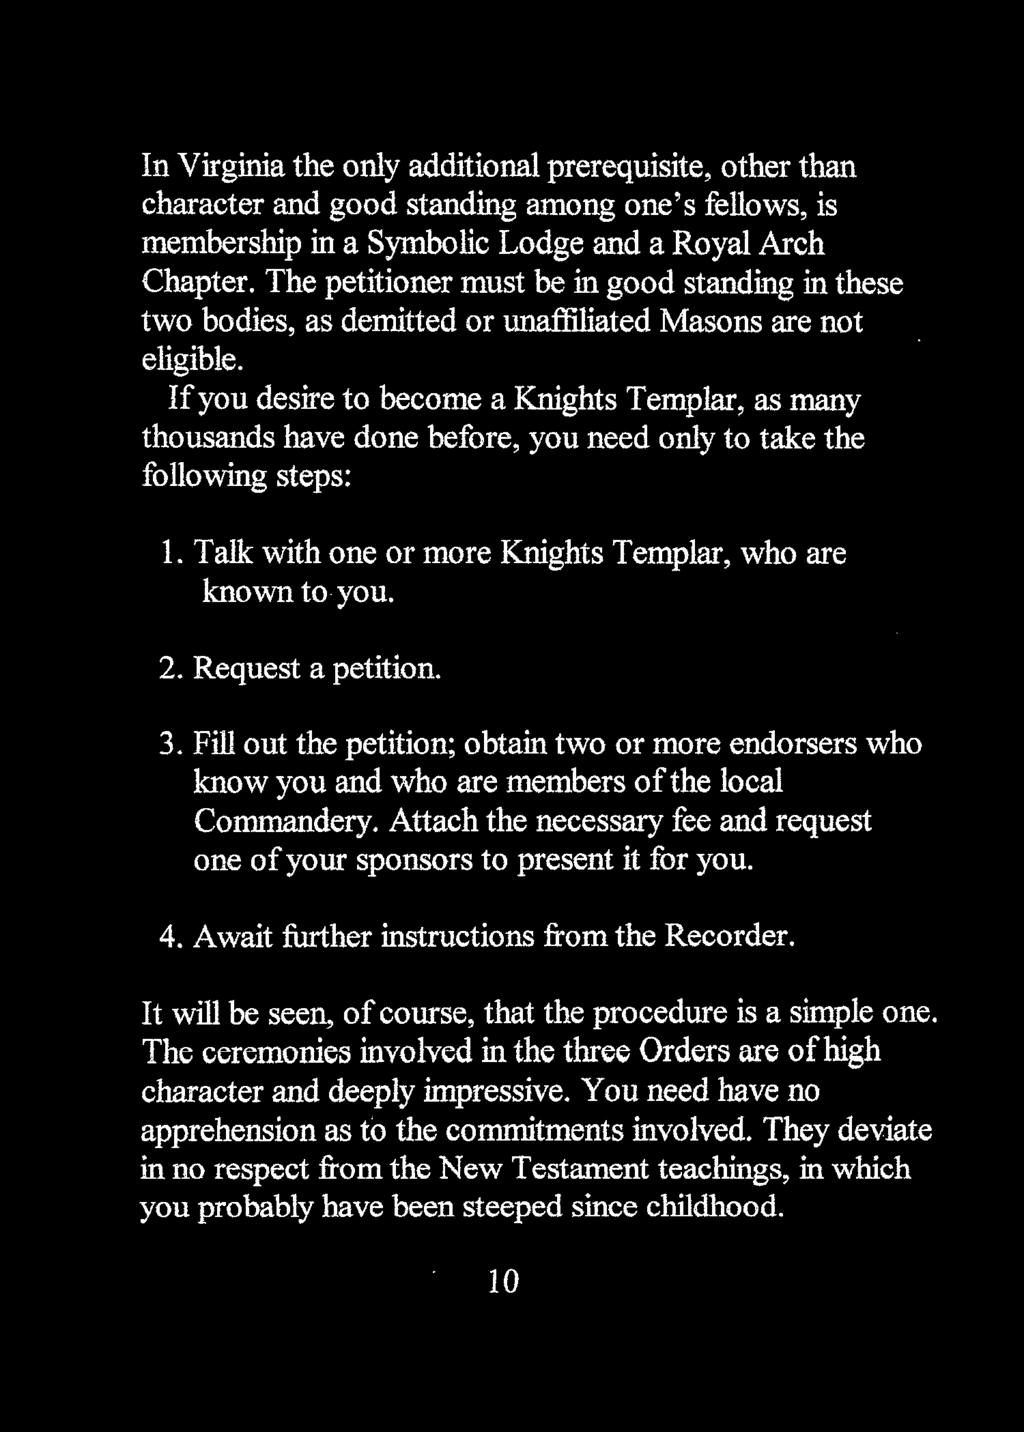 If you desire to become a Knights Templar, as many thousands have done before, you need only to take the following steps: 1. Talk with one or more Knights Templar, who are known to you. 2.